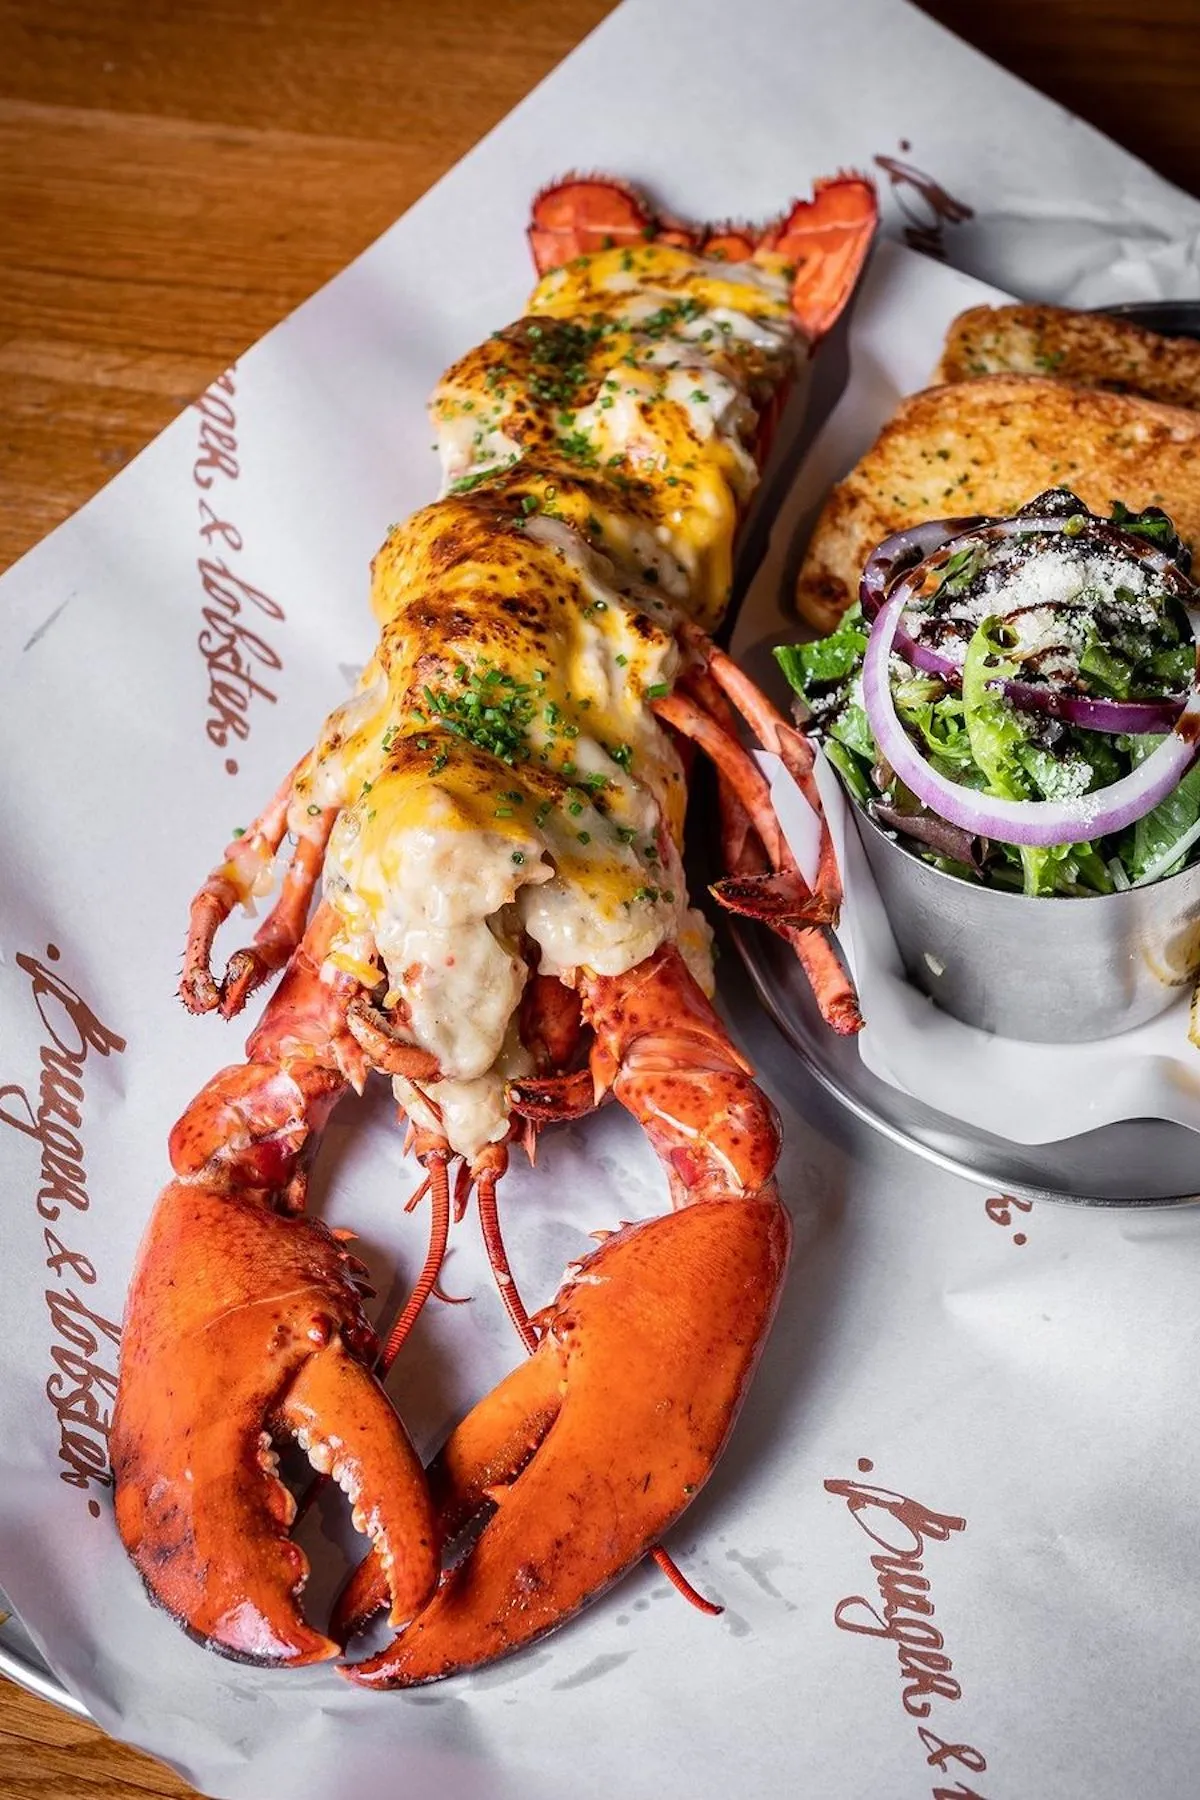 A baked lobster with special sauce with garlic bread and a salad in a restaurant in Bangkok